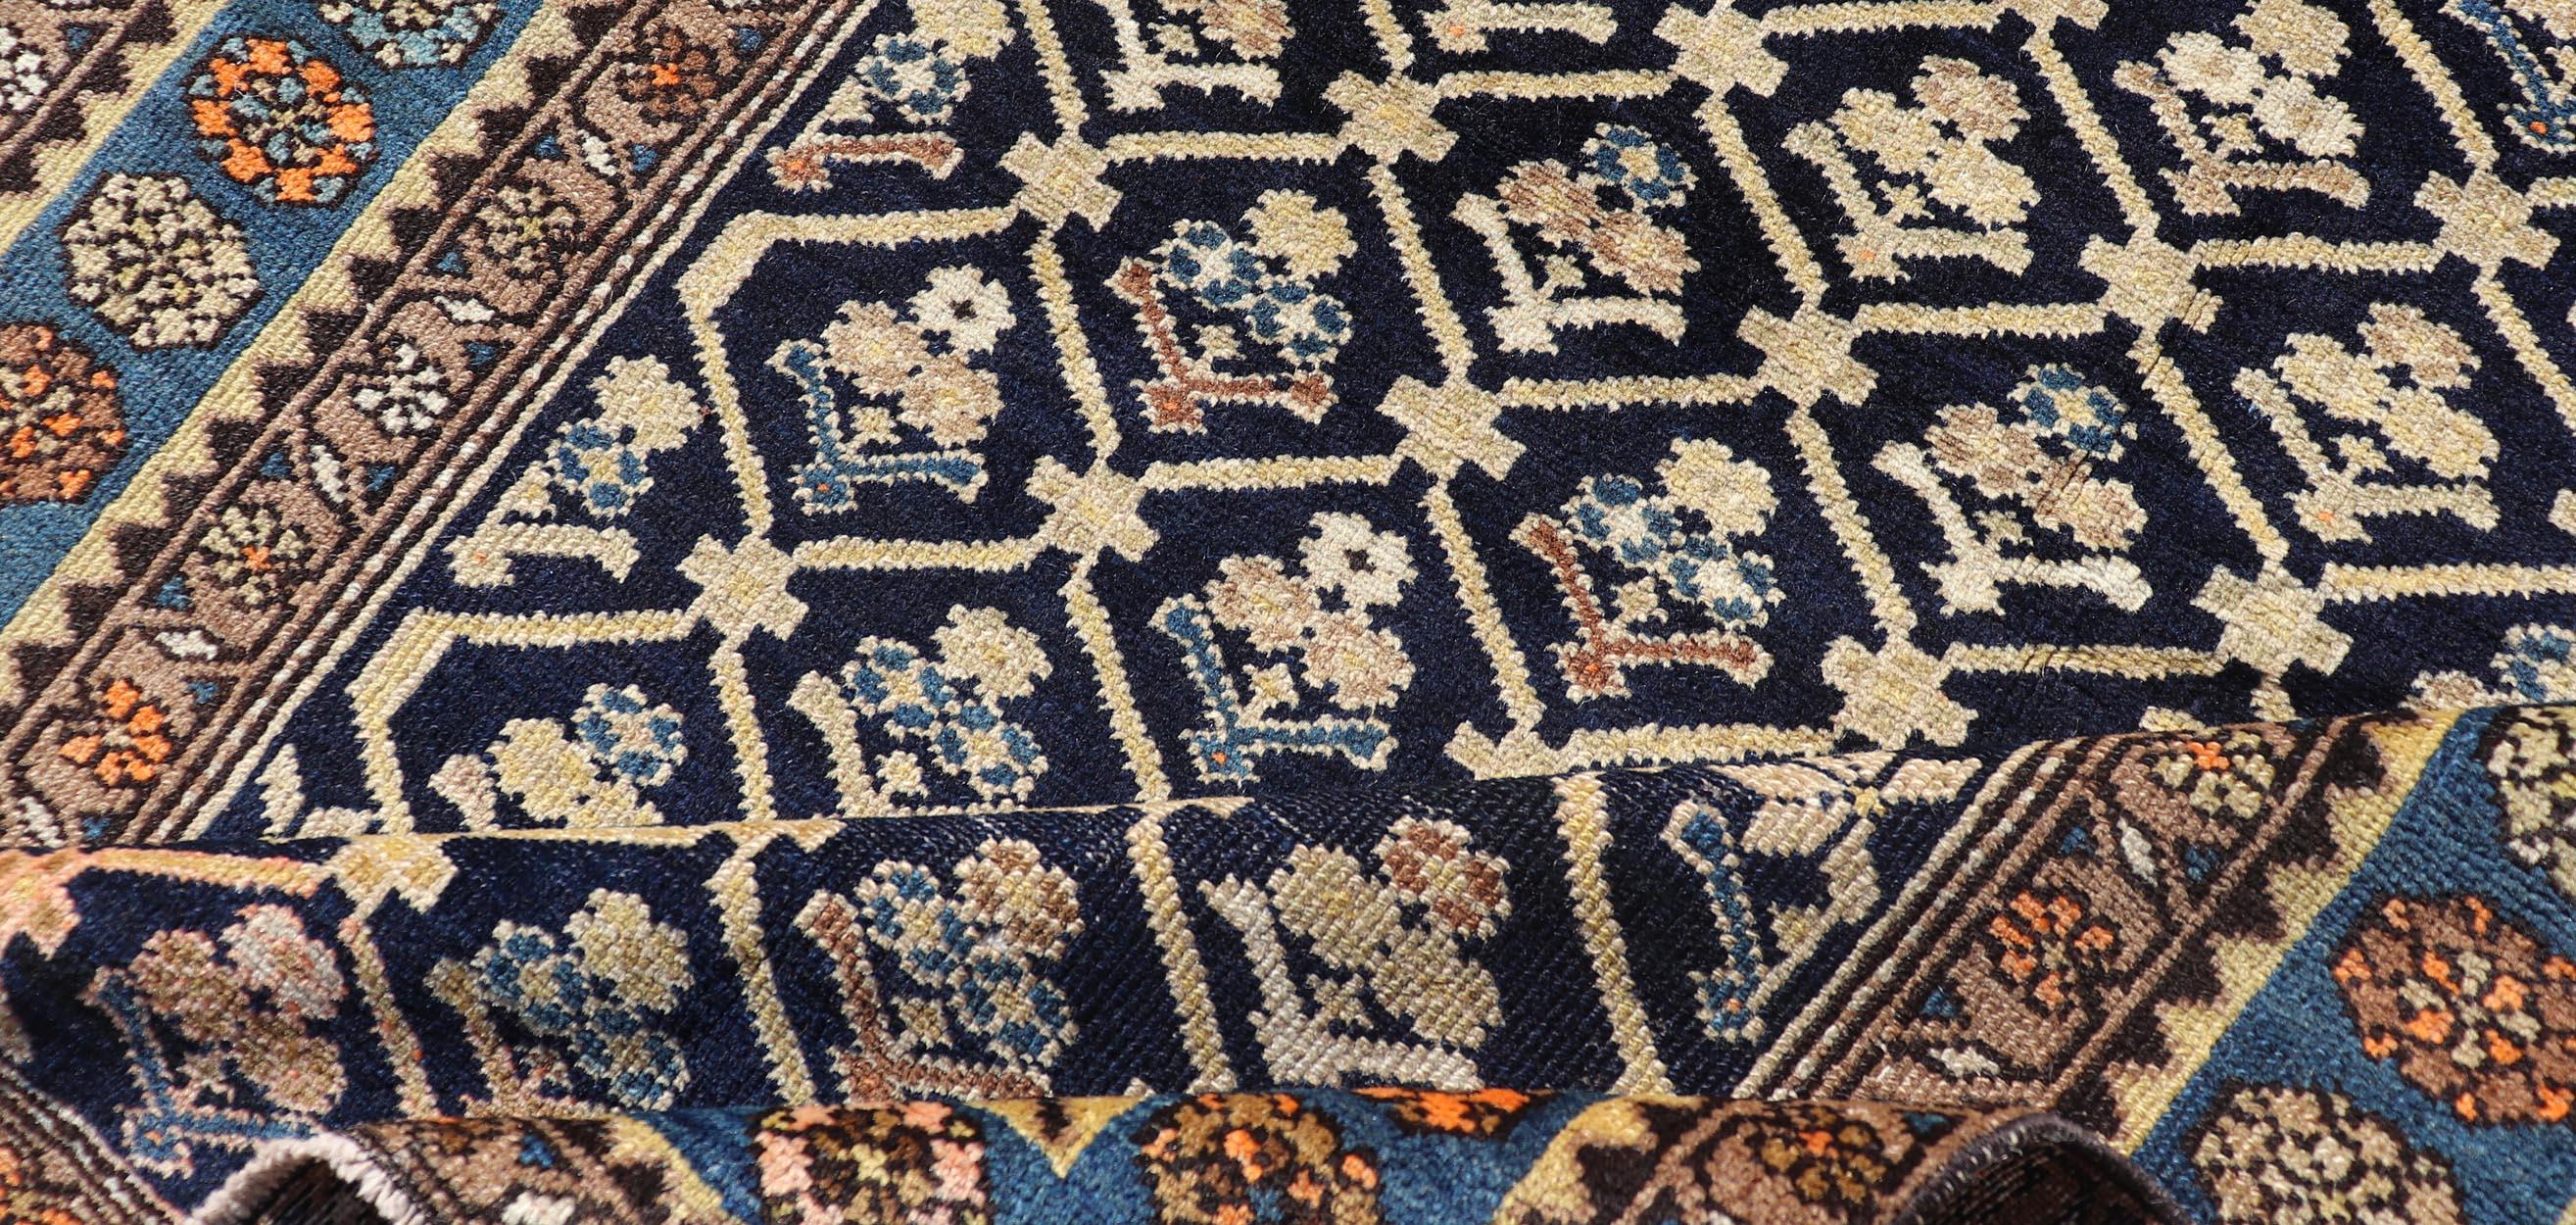 Persian Antique Malayer Rug with Layered Motifs and Geometric Design For Sale 6